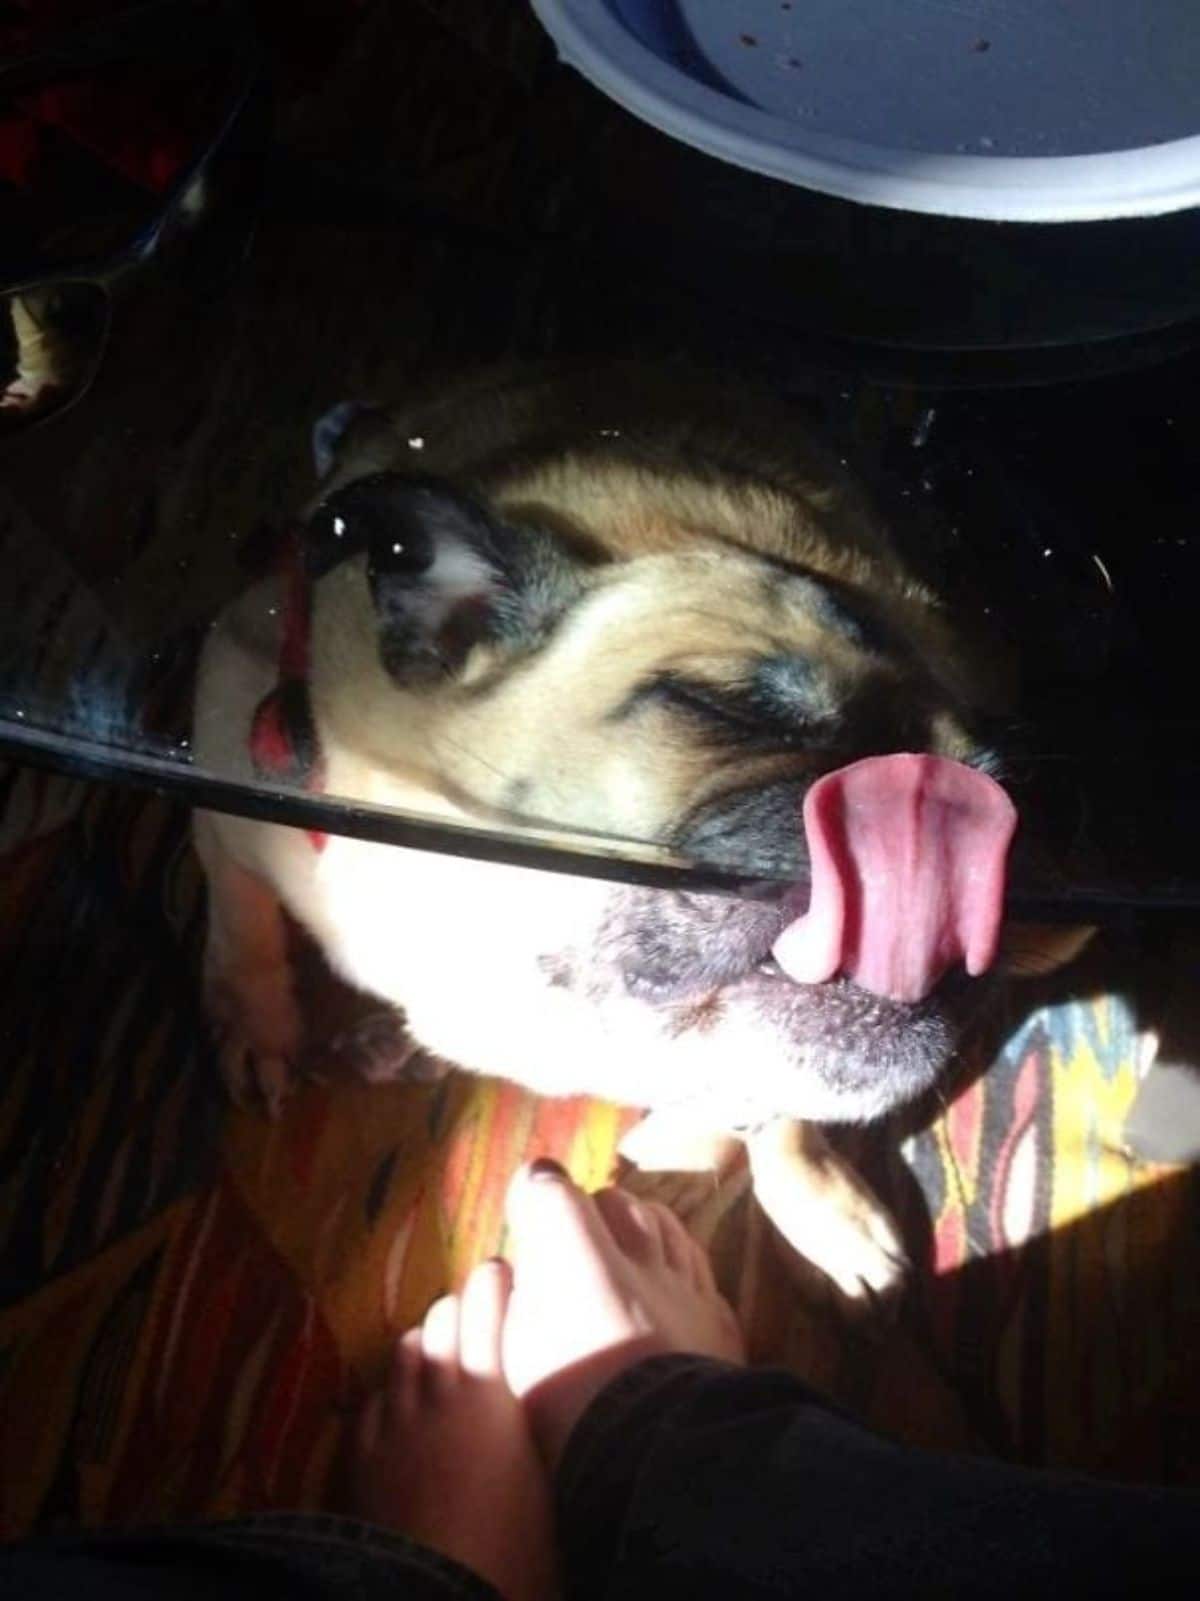 brown dog sitting under a glass table and licking the glass